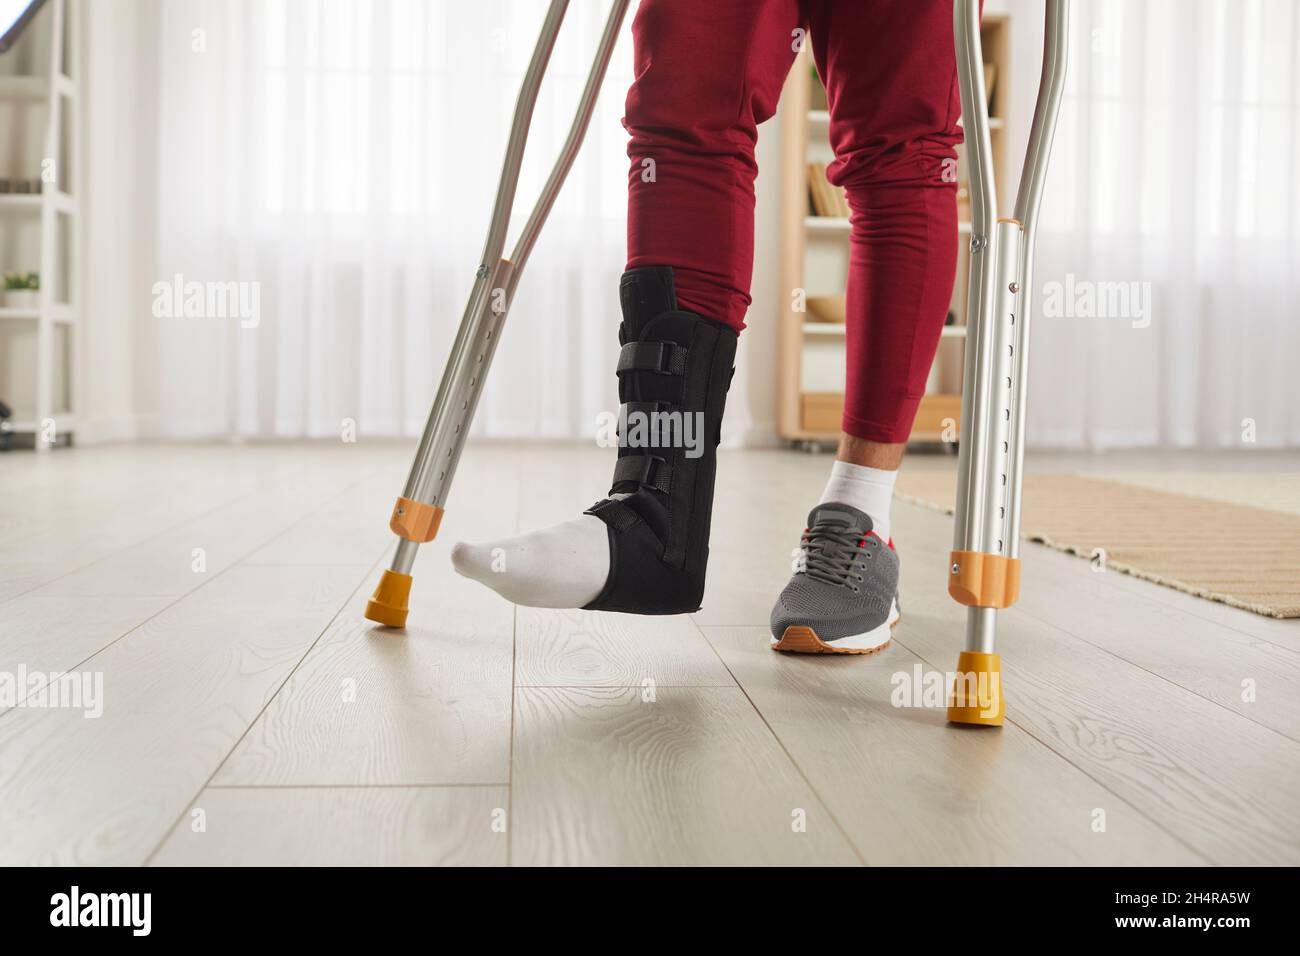 https://c8.alamy.com/comp/2H4RA5W/person-with-foot-injury-wearing-leg-support-brace-and-walking-on-crutches-at-home-2H4RA5W.jpg